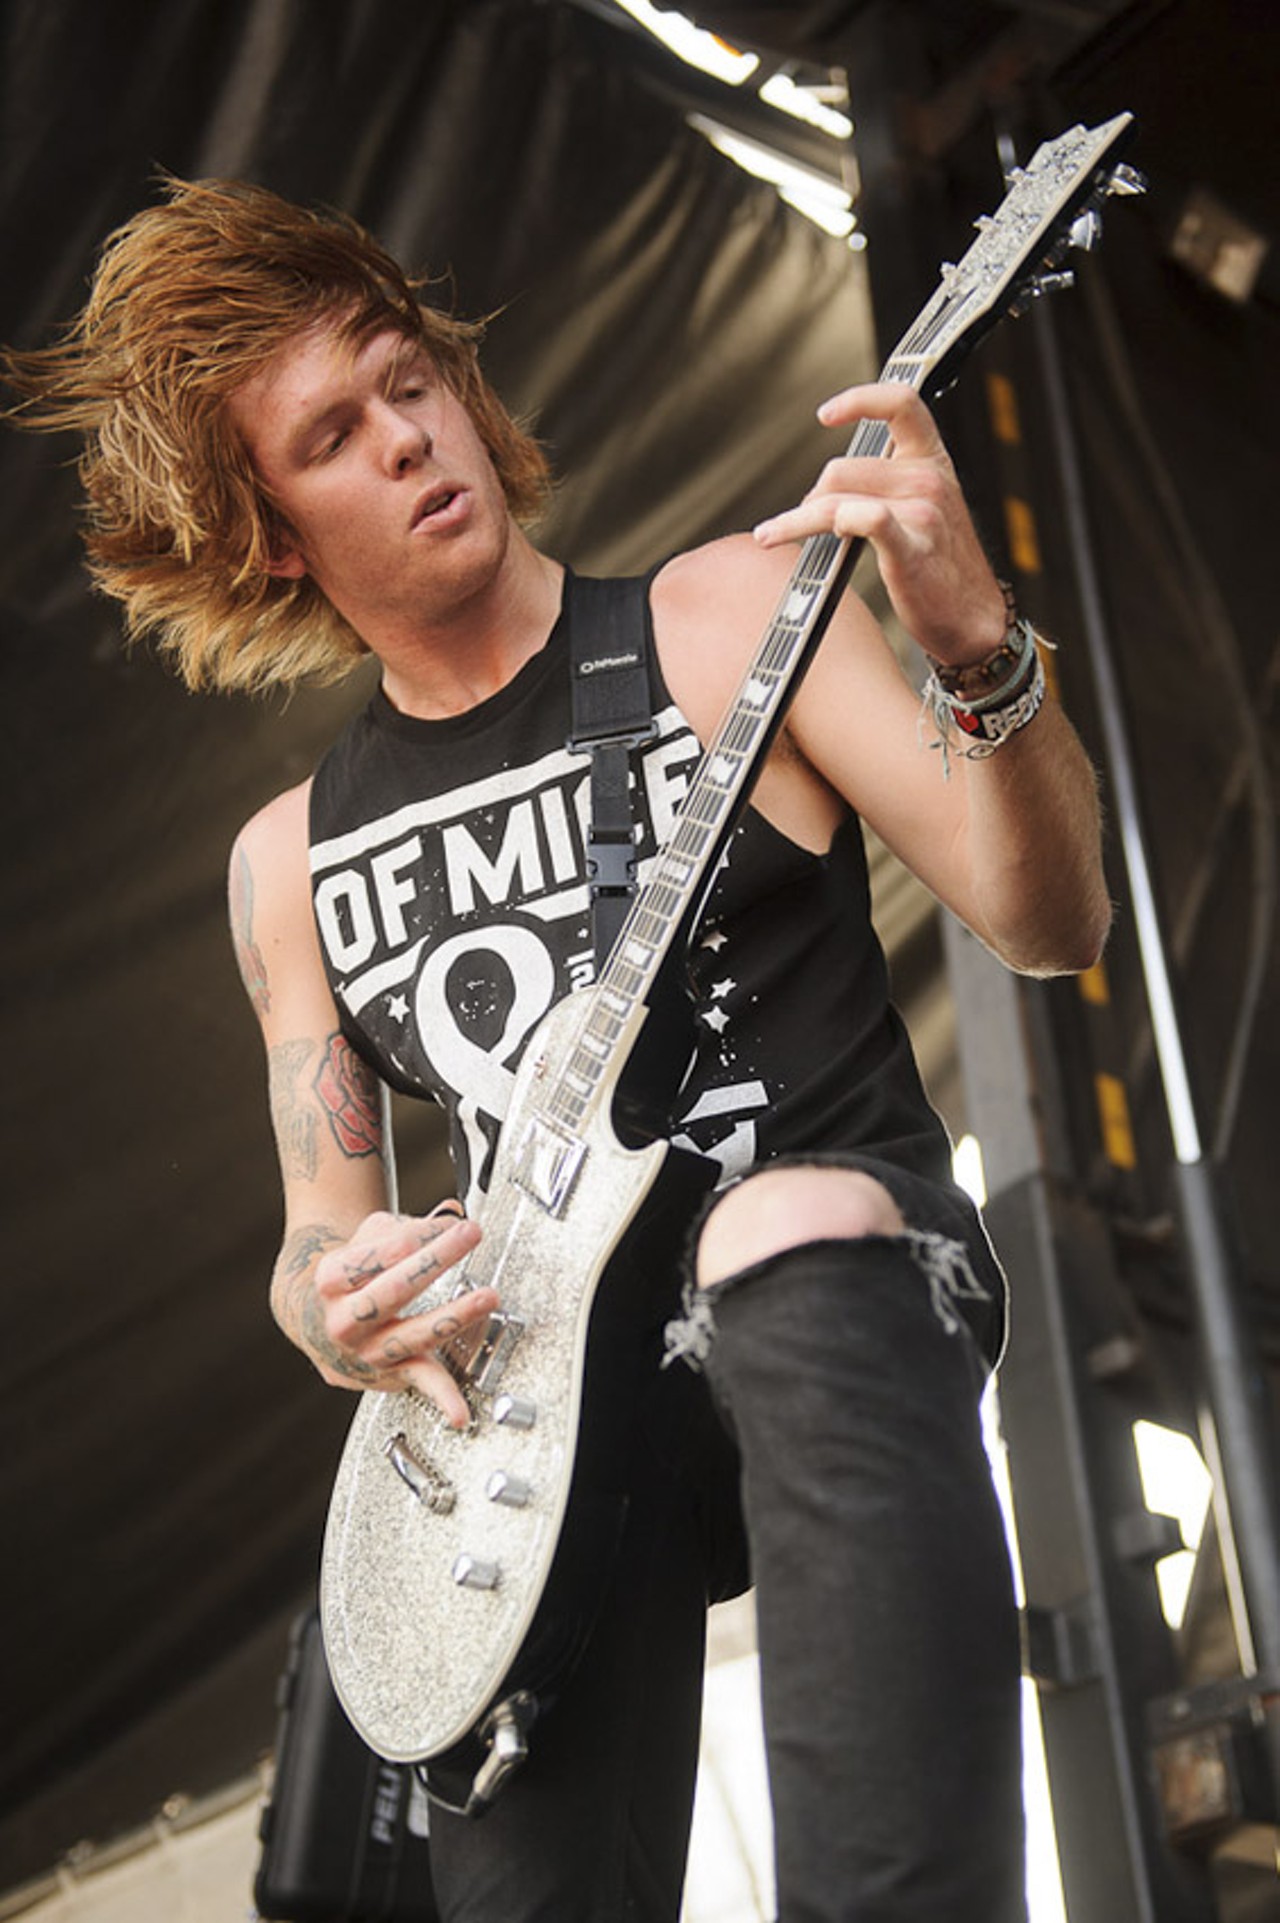 Of Mice And Men performing at Warped Tour at the Verizon Wireless Amphitheater in St. Louis on July 5, 2012.